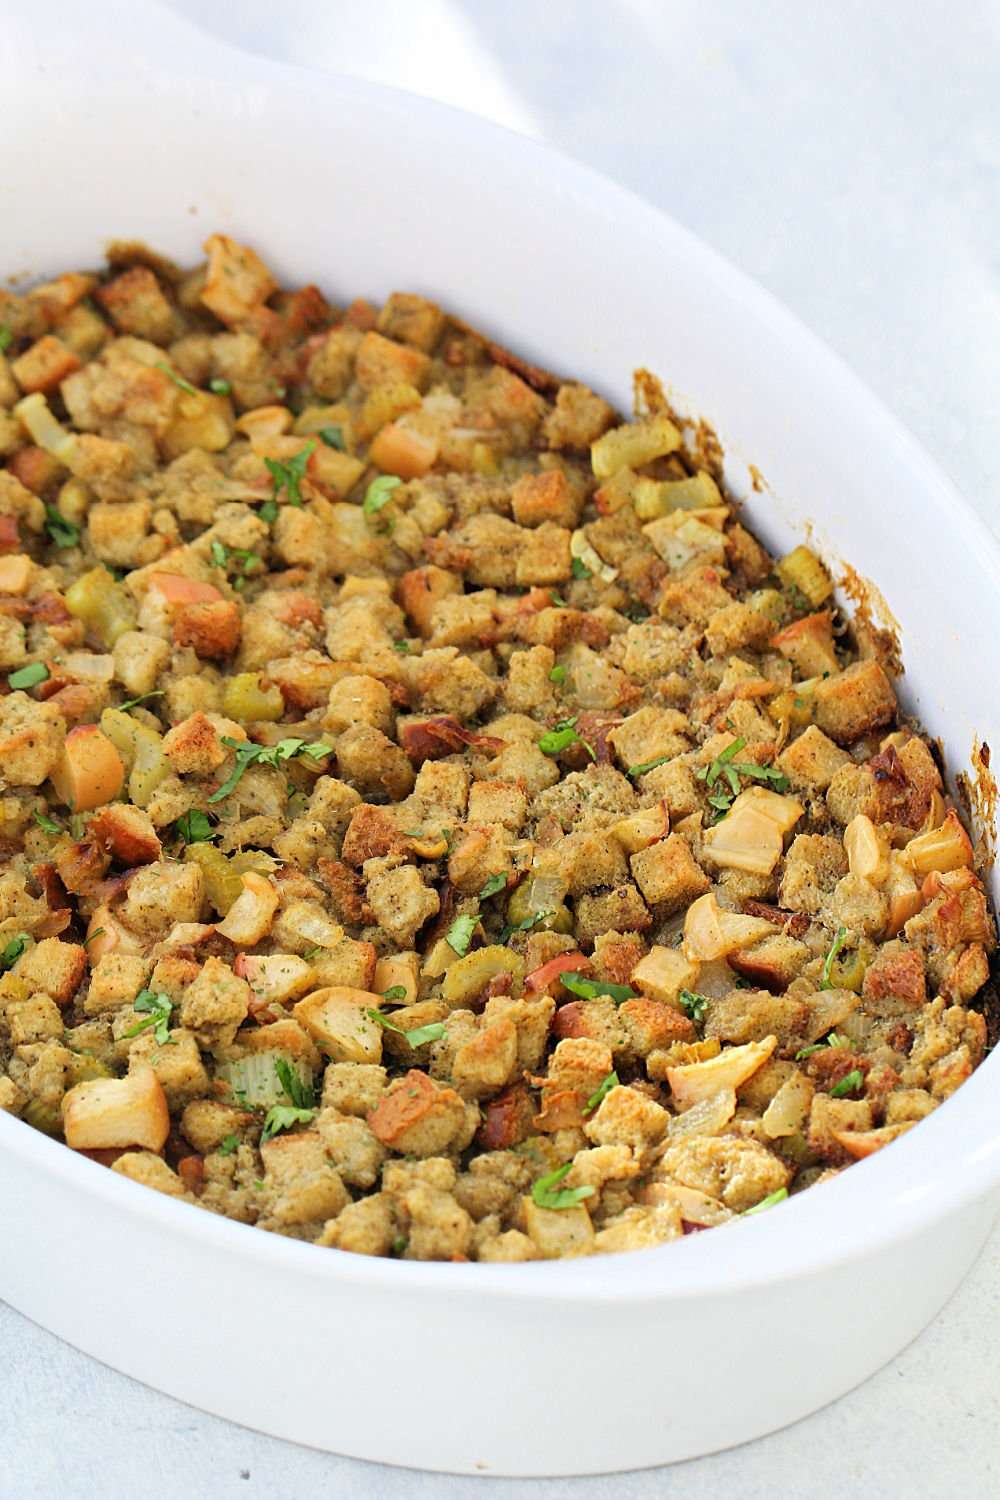 Homemade Stuffing Served with Apple Sauce